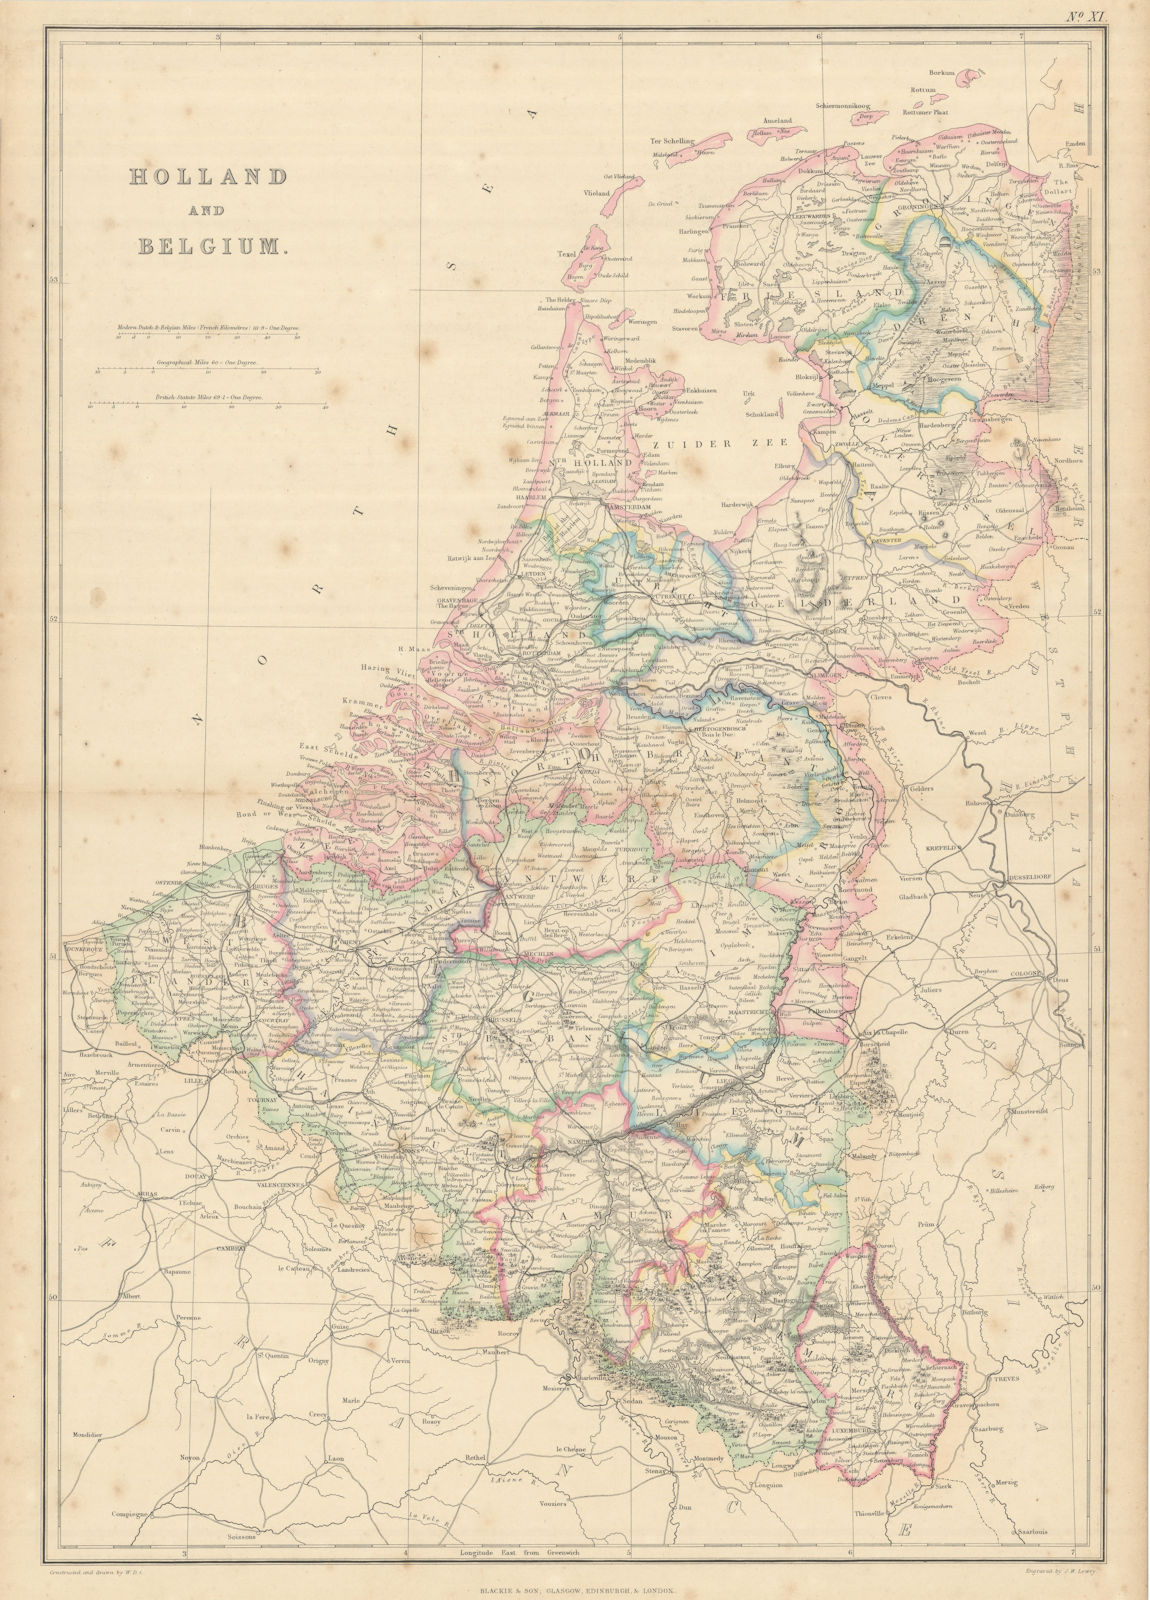 Associate Product Holland and Belgium by Joseph Wilson Lowry. Netherlands 1860 old antique map